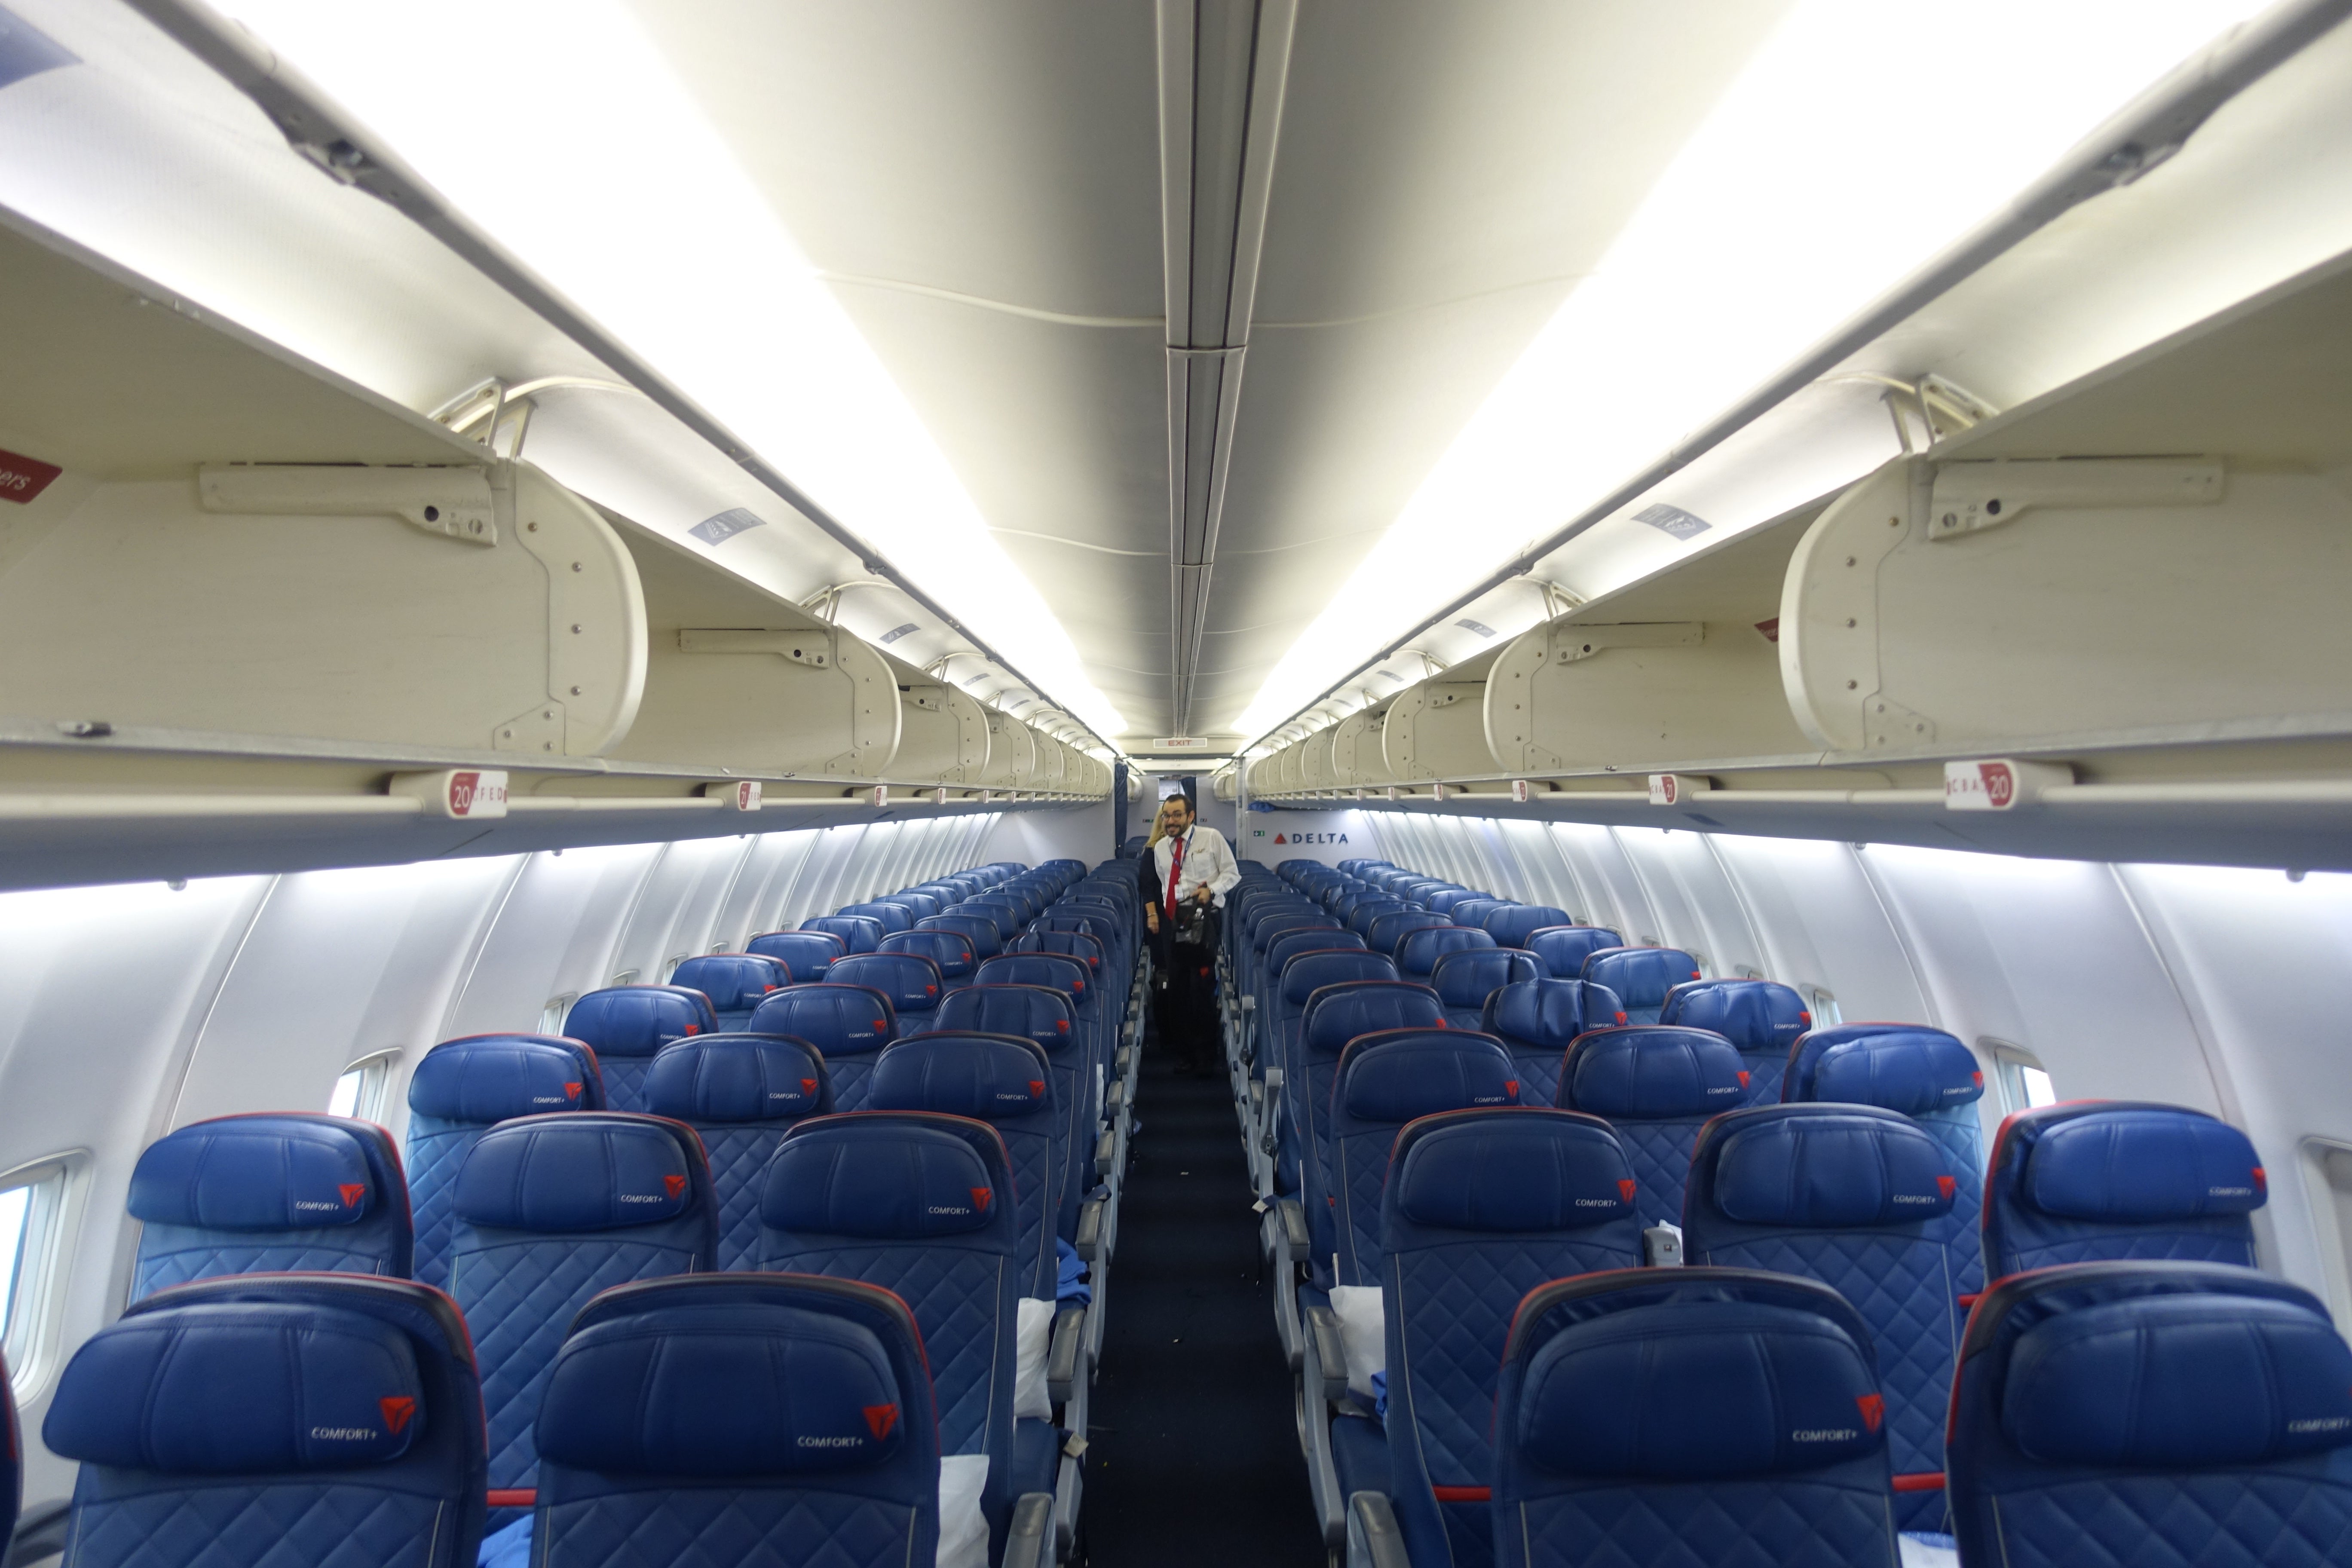 Review: Delta Comfort+ (757-200), San Francisco to New York - The